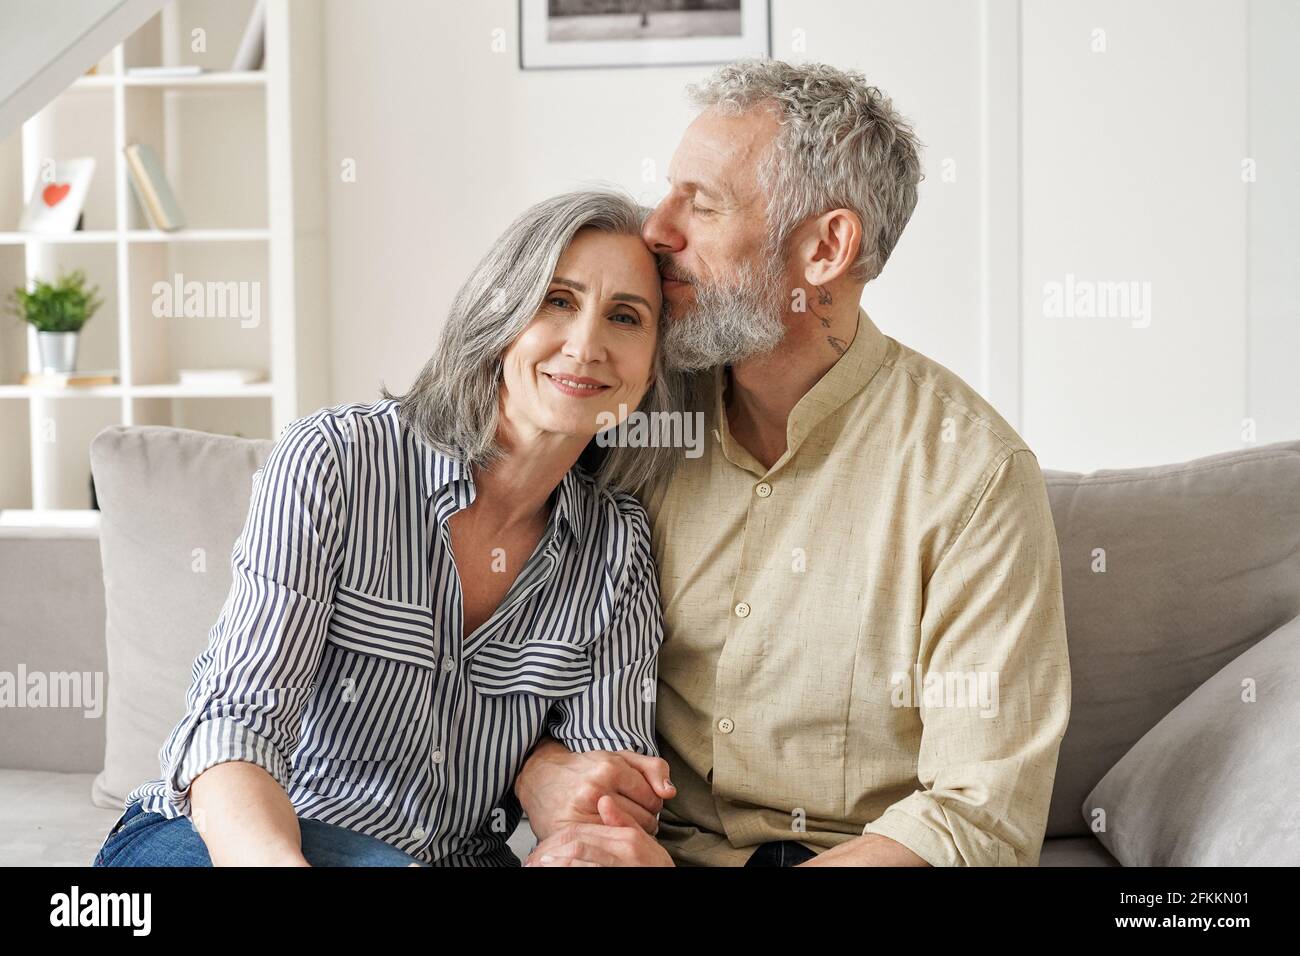 Happy affectionate classy older mature couple bonding with eyes closed at home. Stock Photo